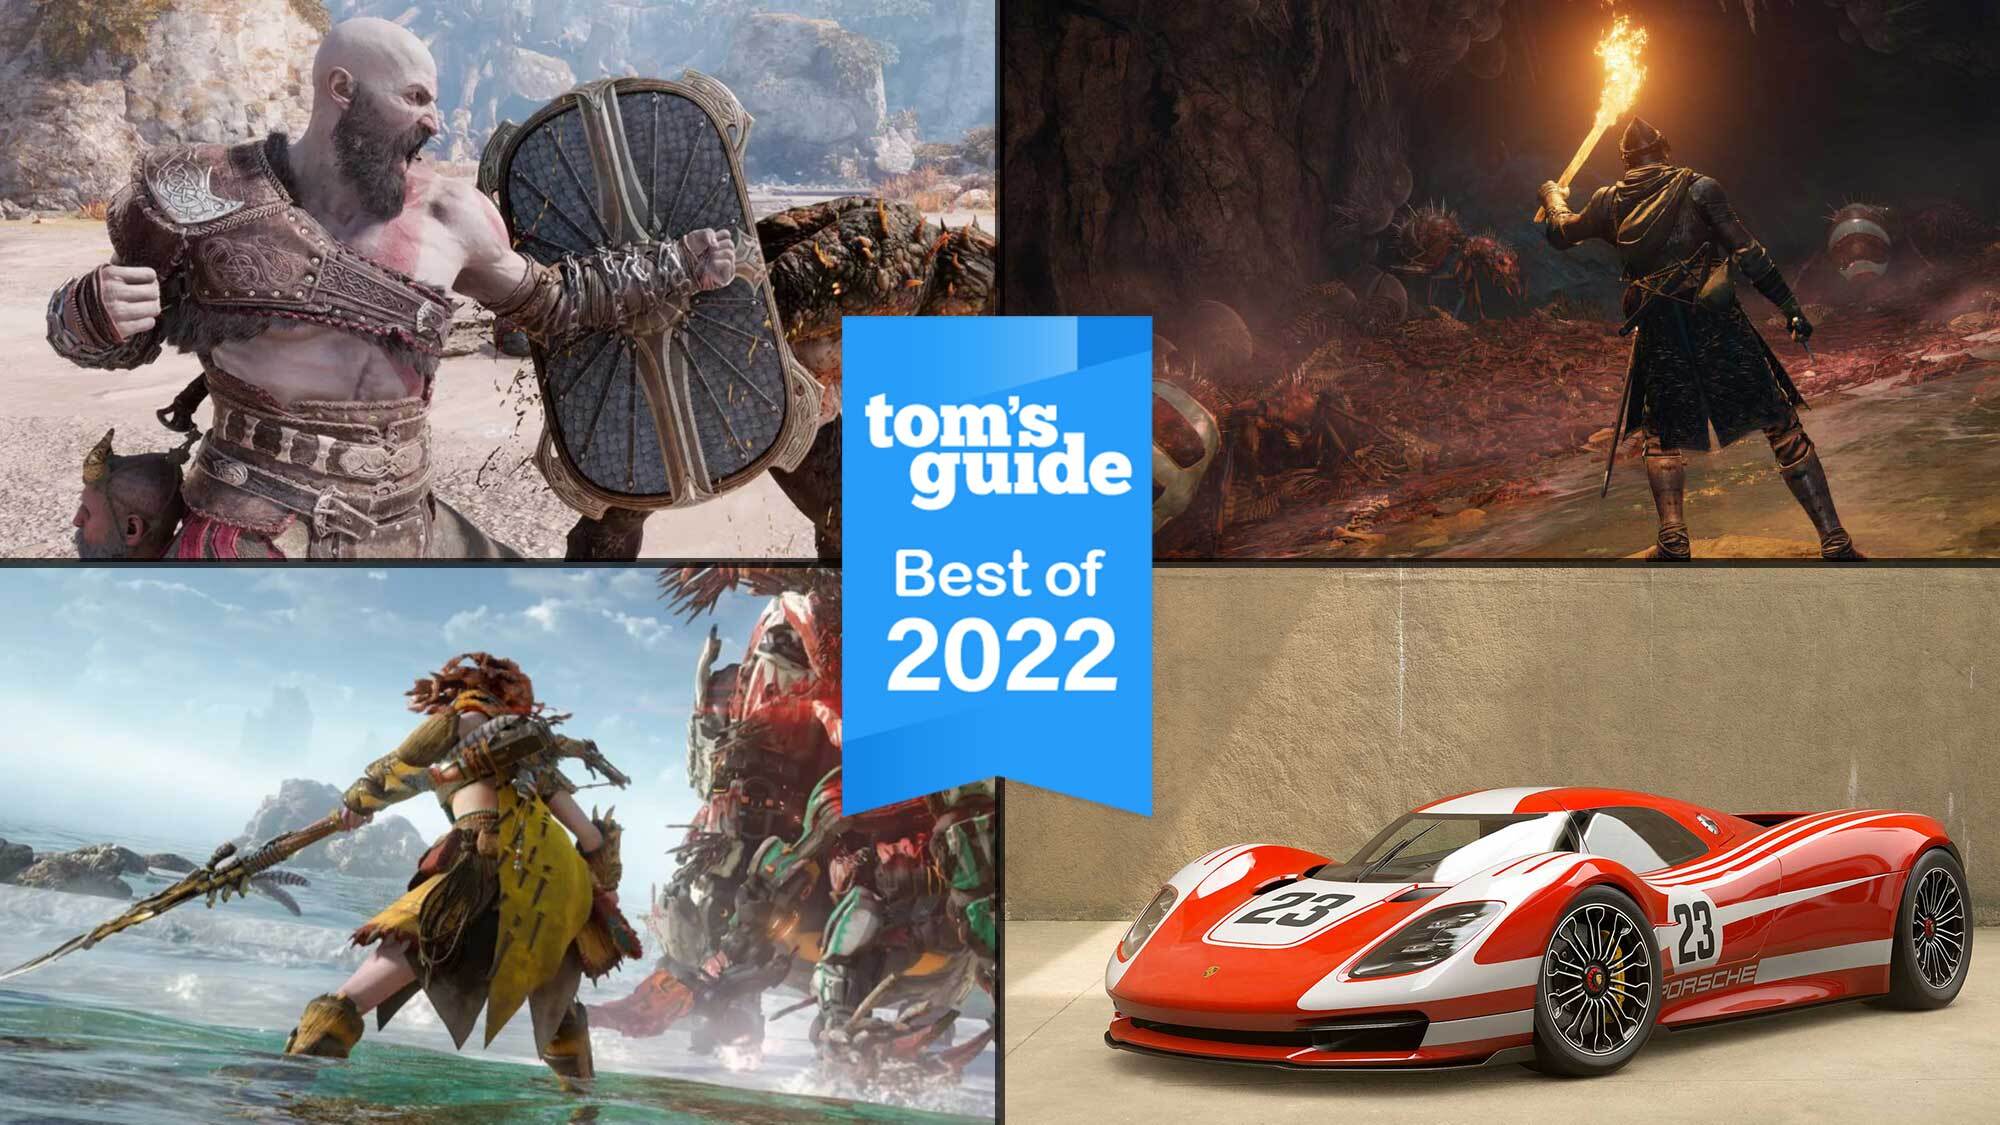 10 new video games for Xbox, PC, PS5 & Nintendo Switch in March 2022